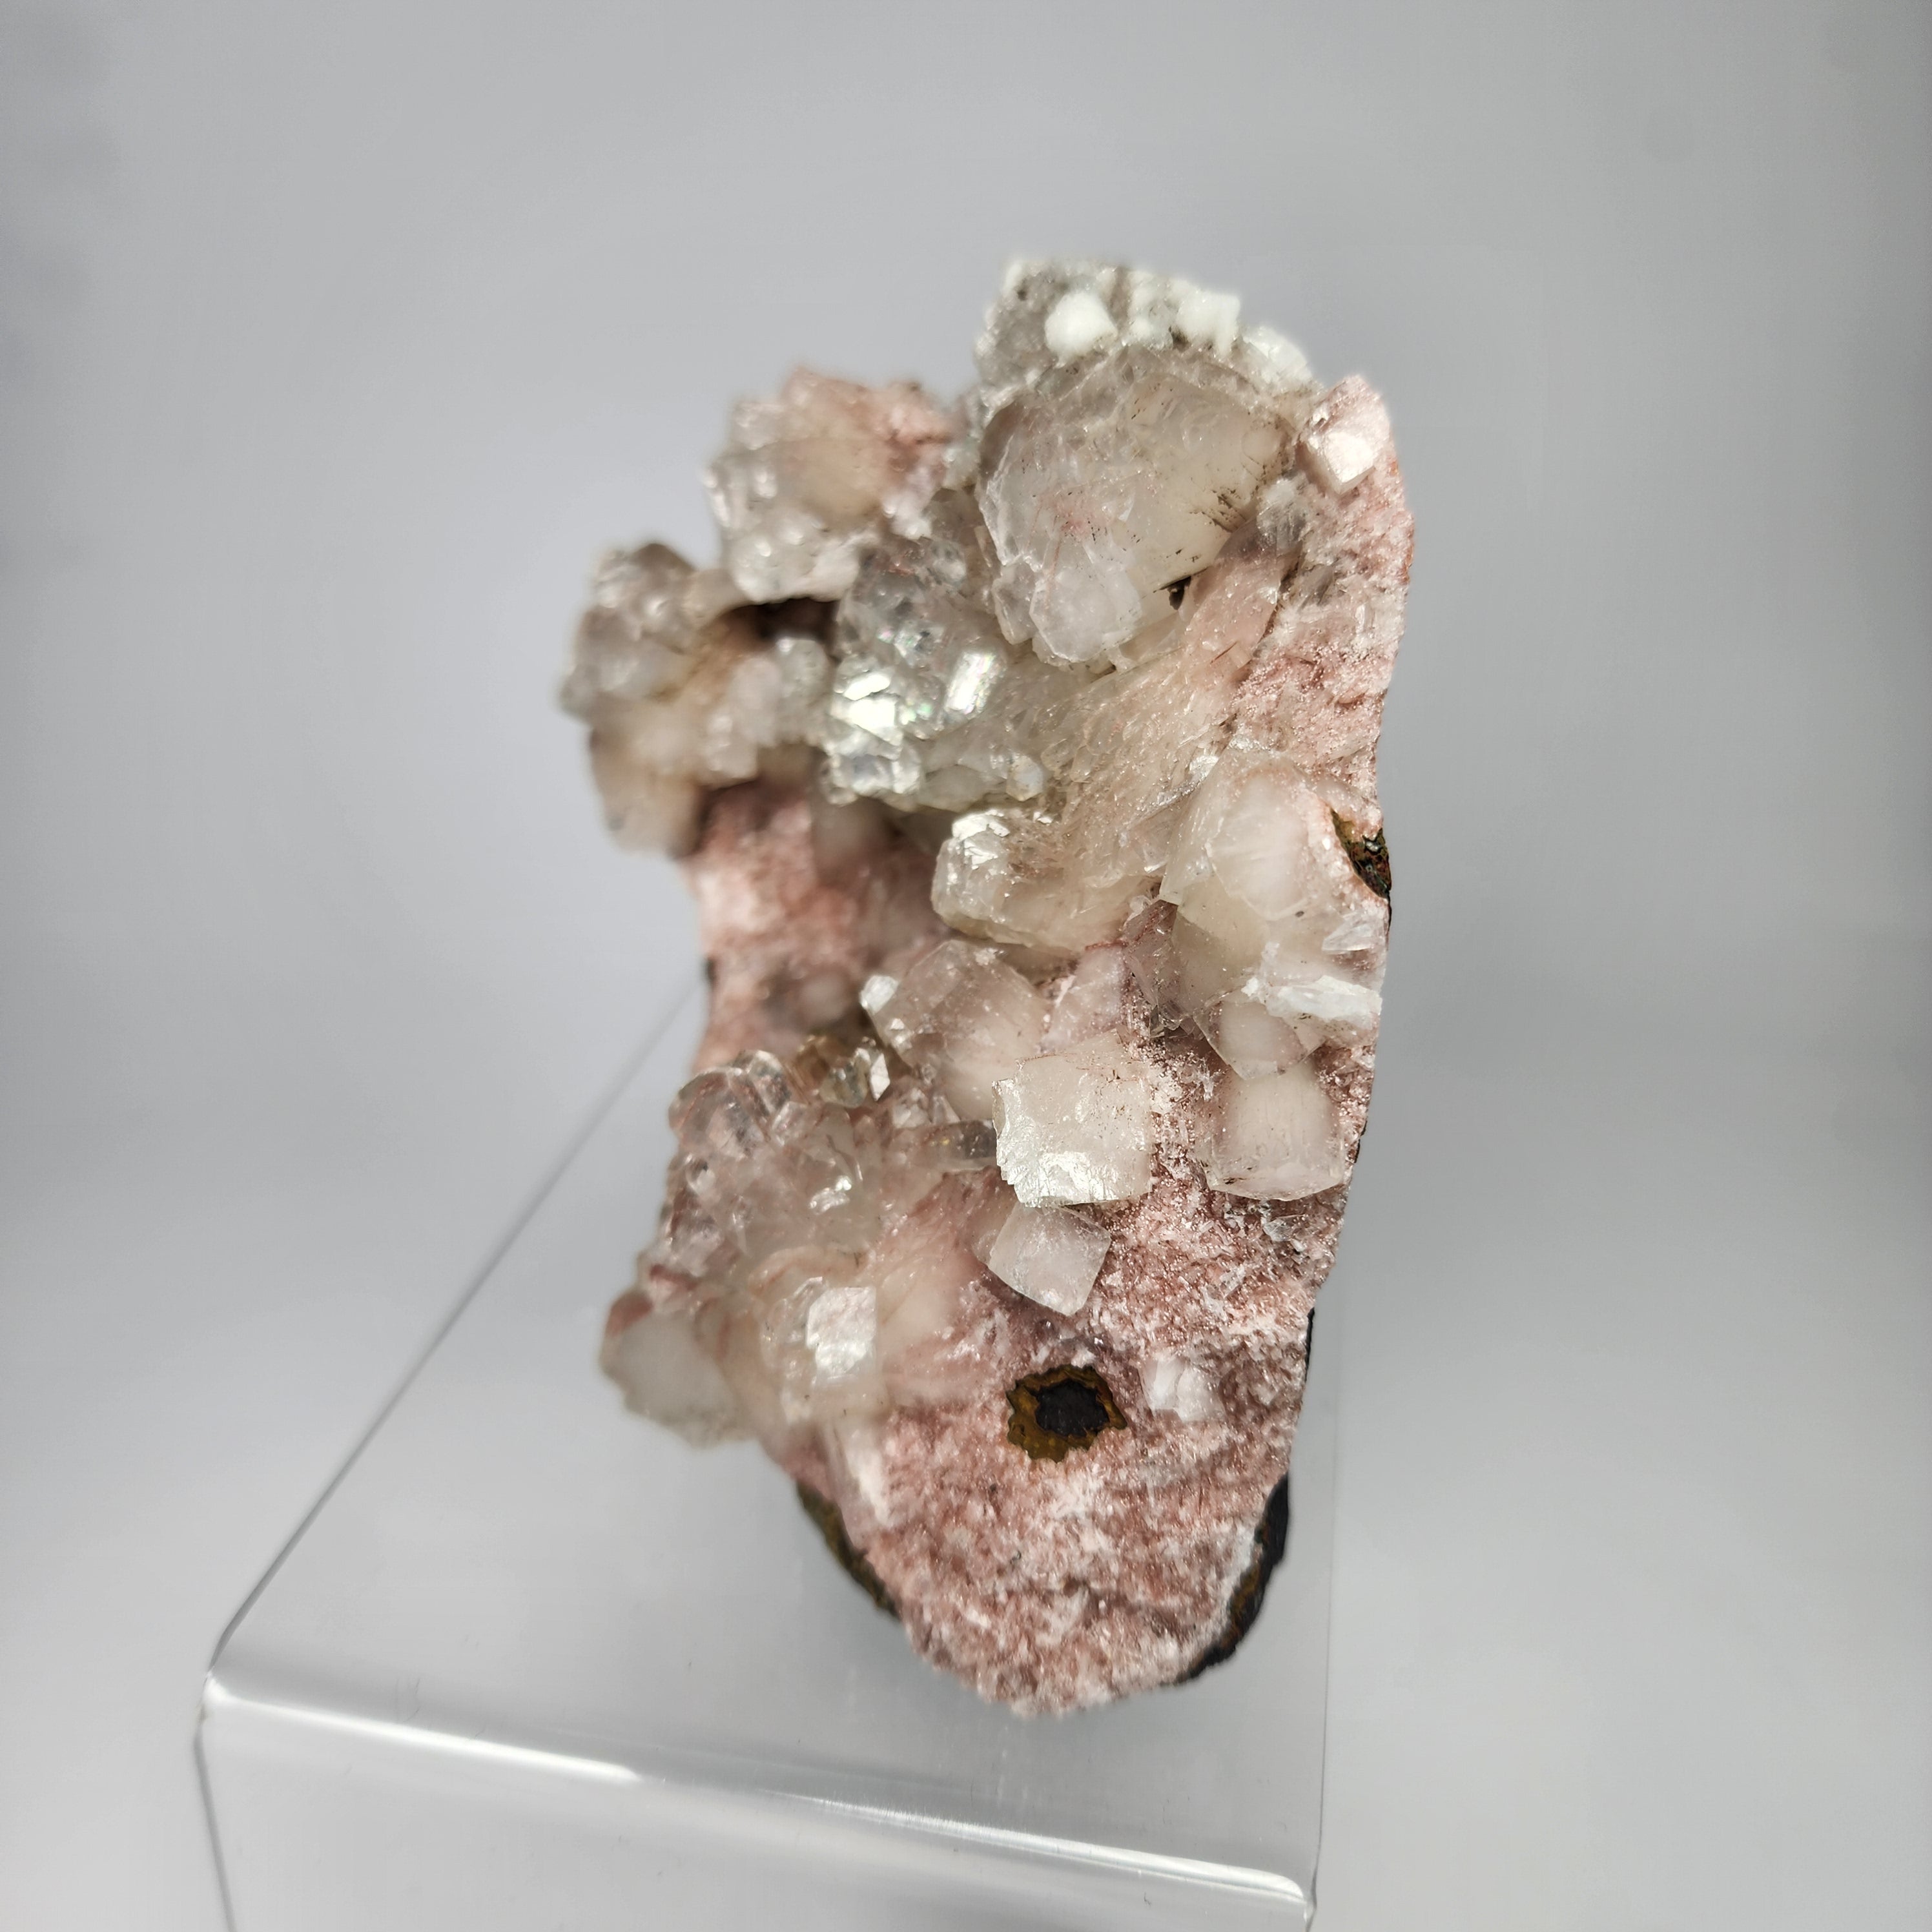 Pink Chalcedony with Disco Ball Formation Apophyllite - Specimen #6 - from Pune District, Maharashtra, India